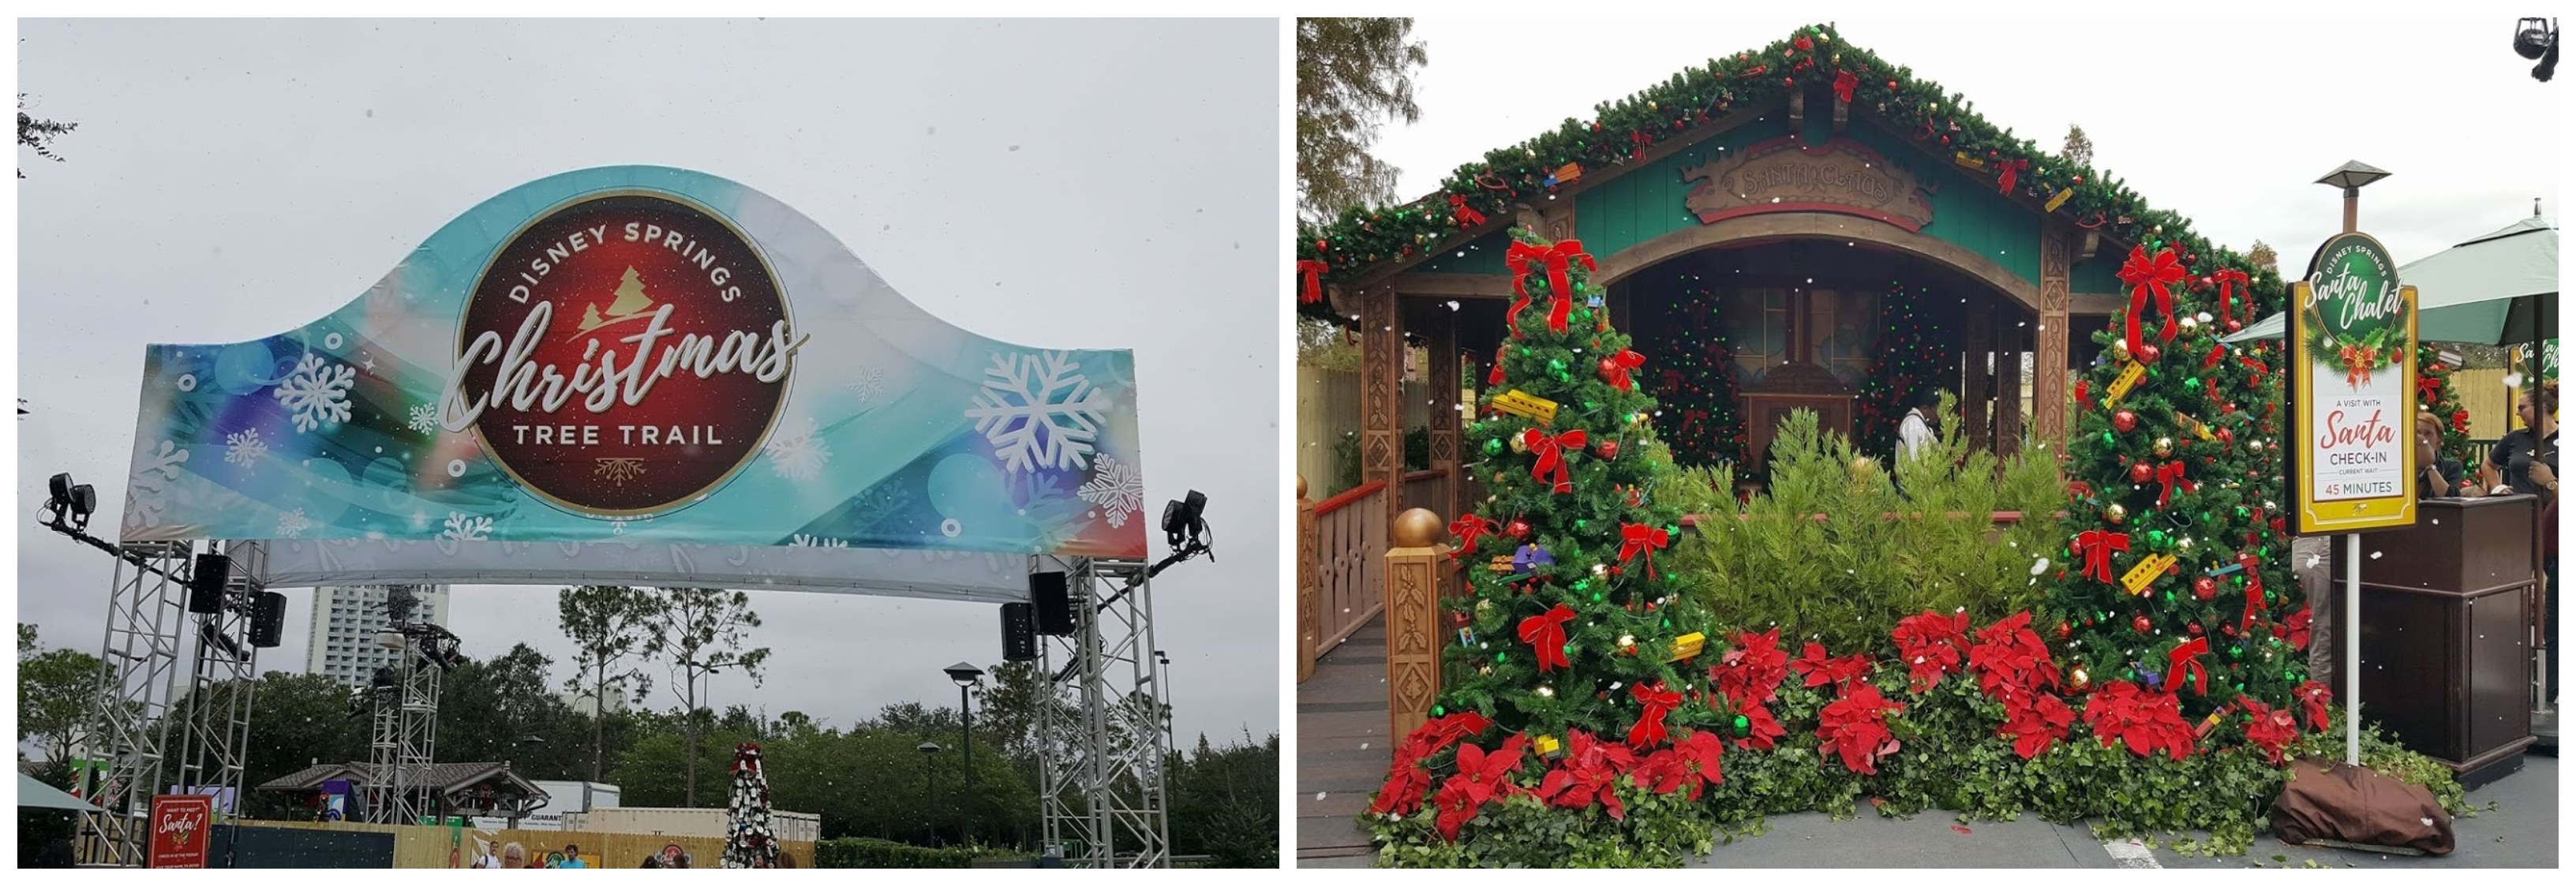 Themes Released For Disney Springs’ 2019 Christmas Tree Trail!